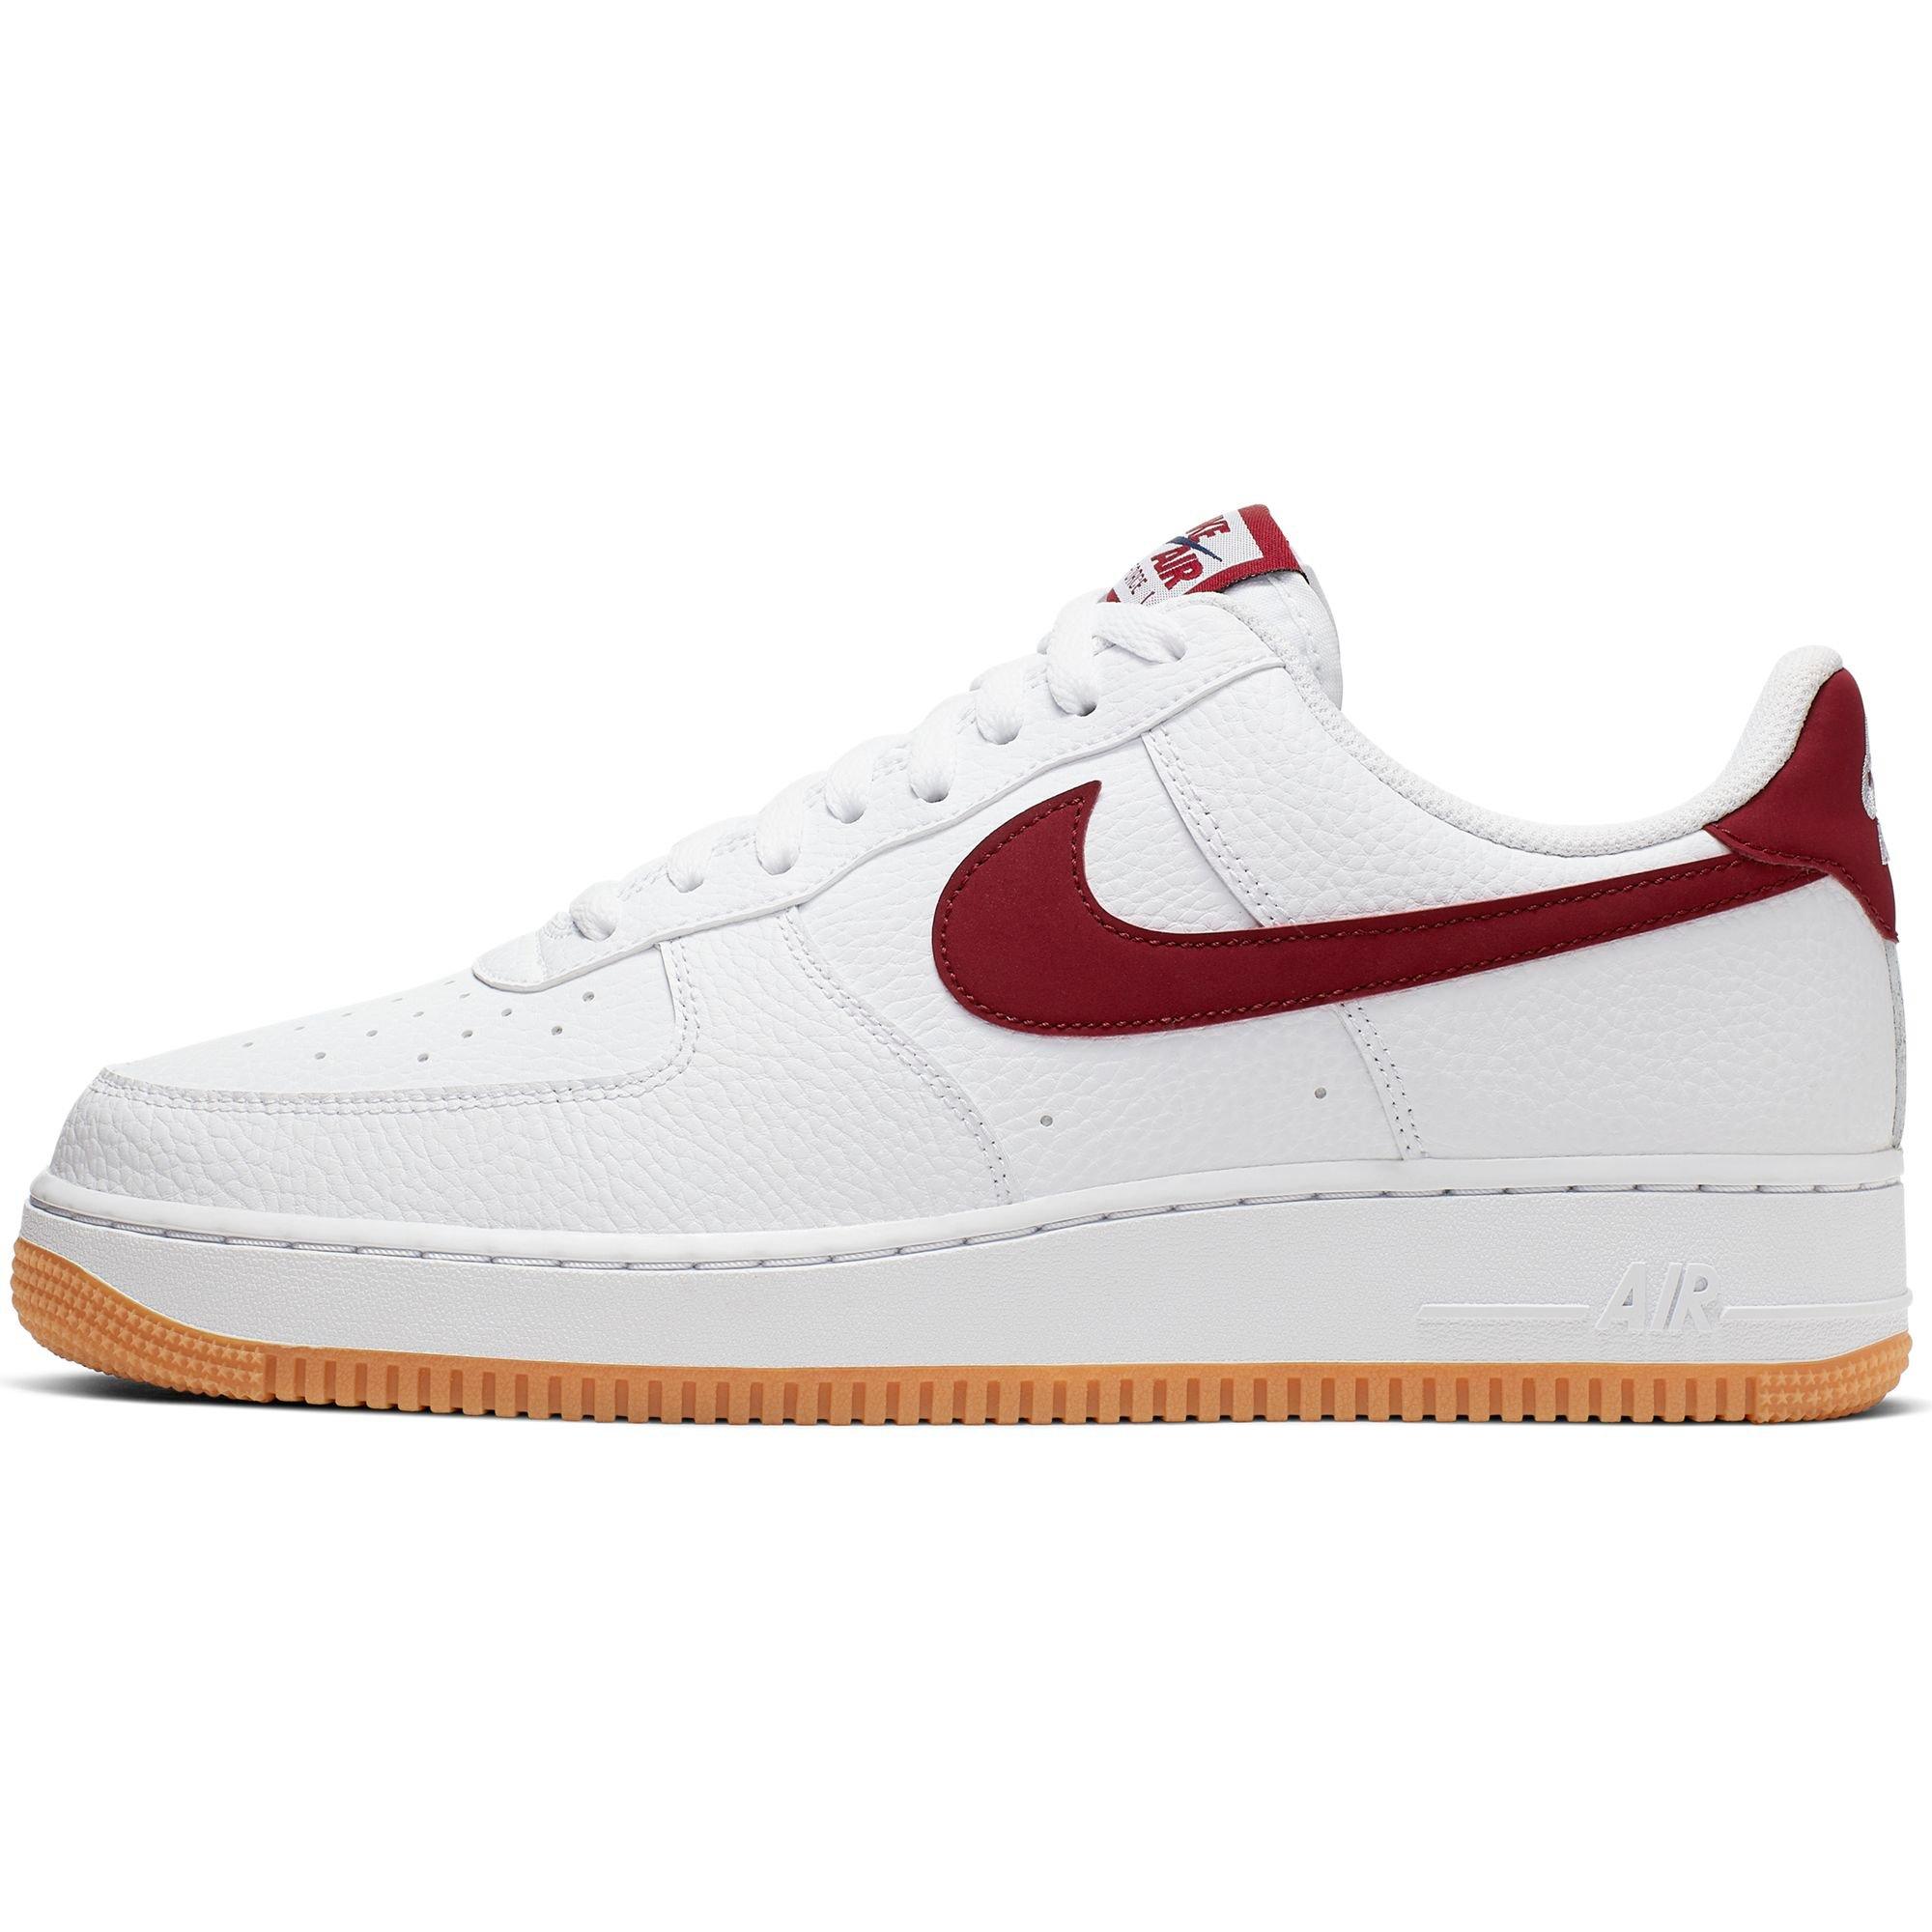 red suede air force 1 gum bottom